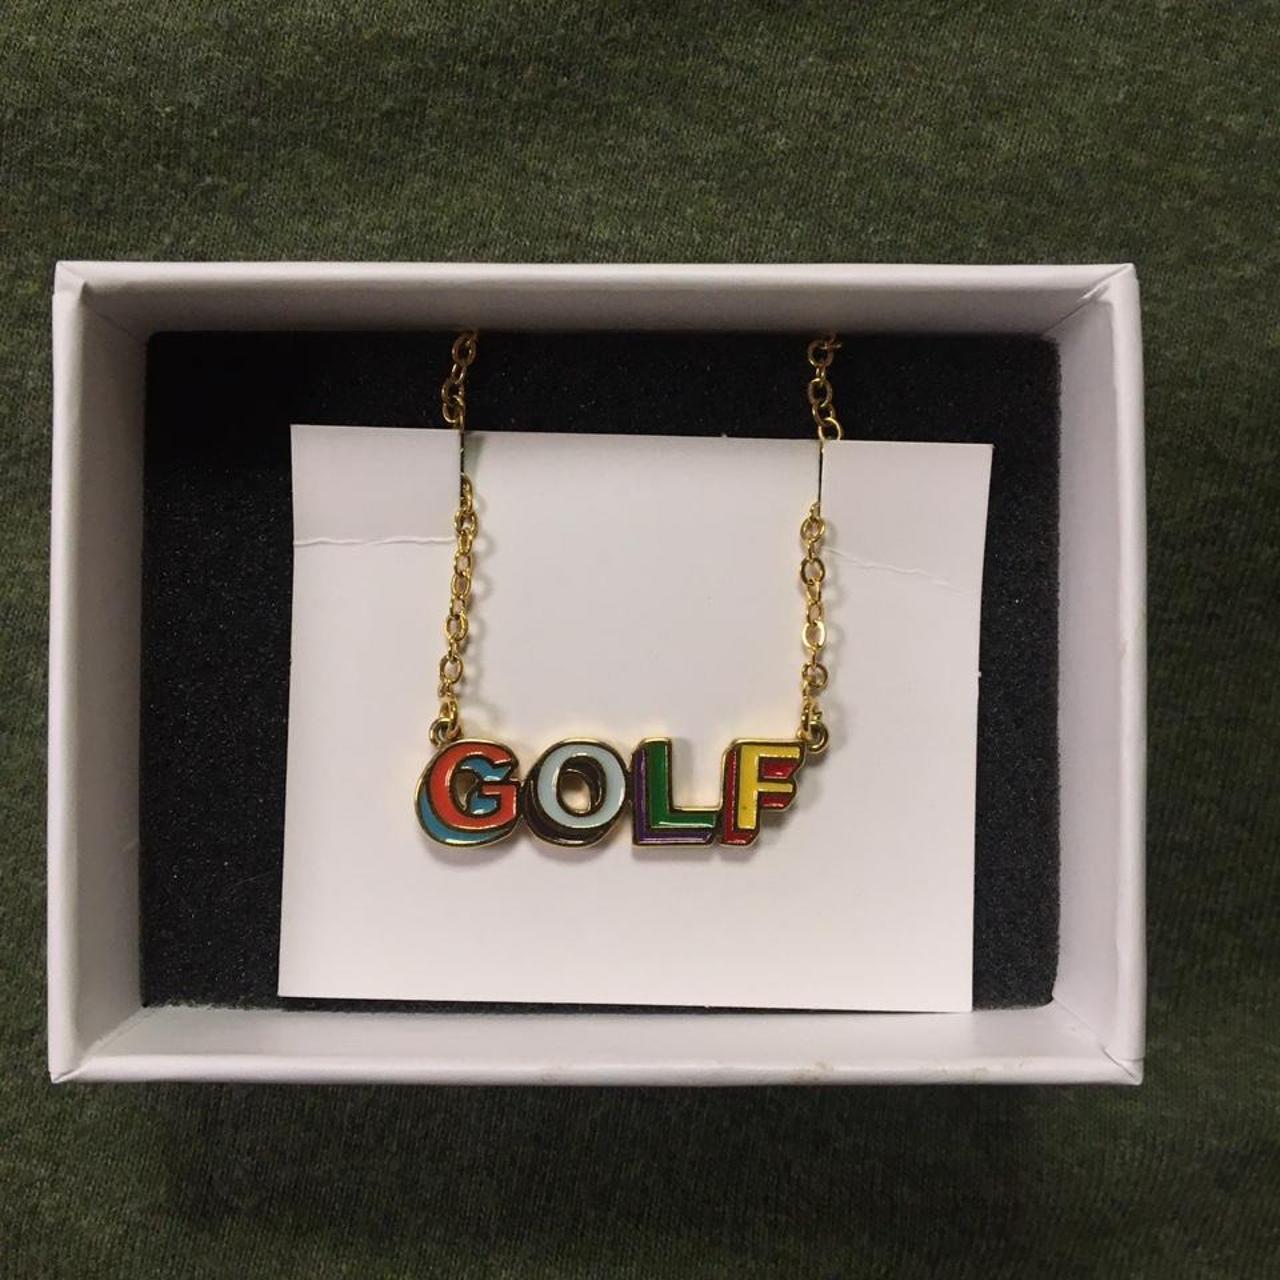 Golfwang 3D Logo Necklace: Perfect condition with... - Depop